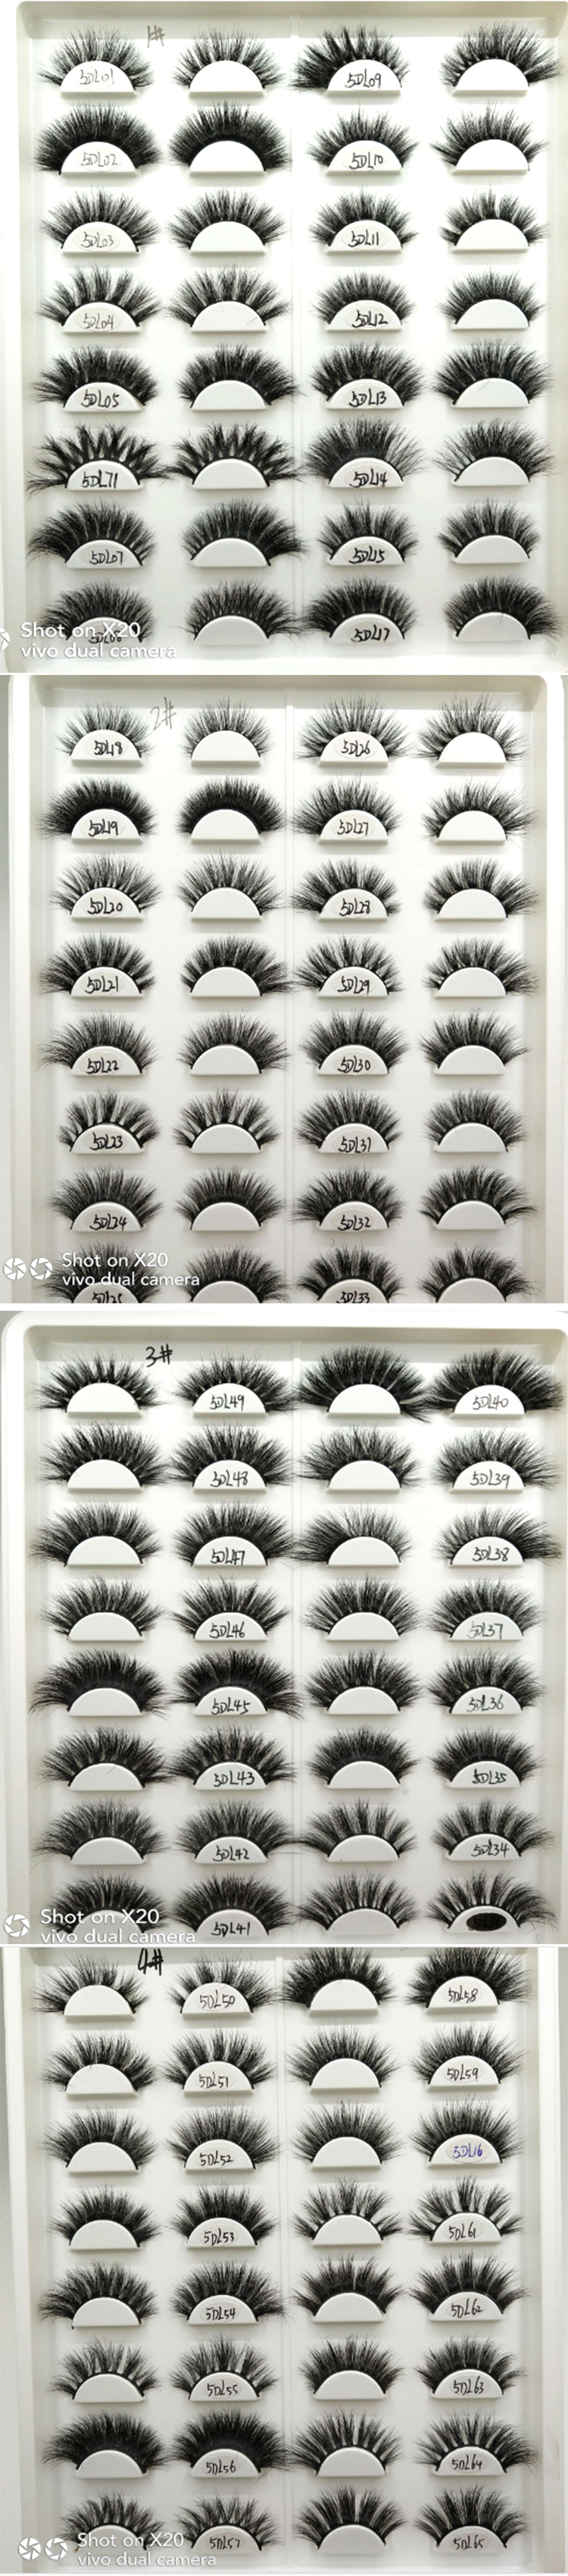 hundreds styles of luxury 5d mink lashes wholesale supplies China.jpg